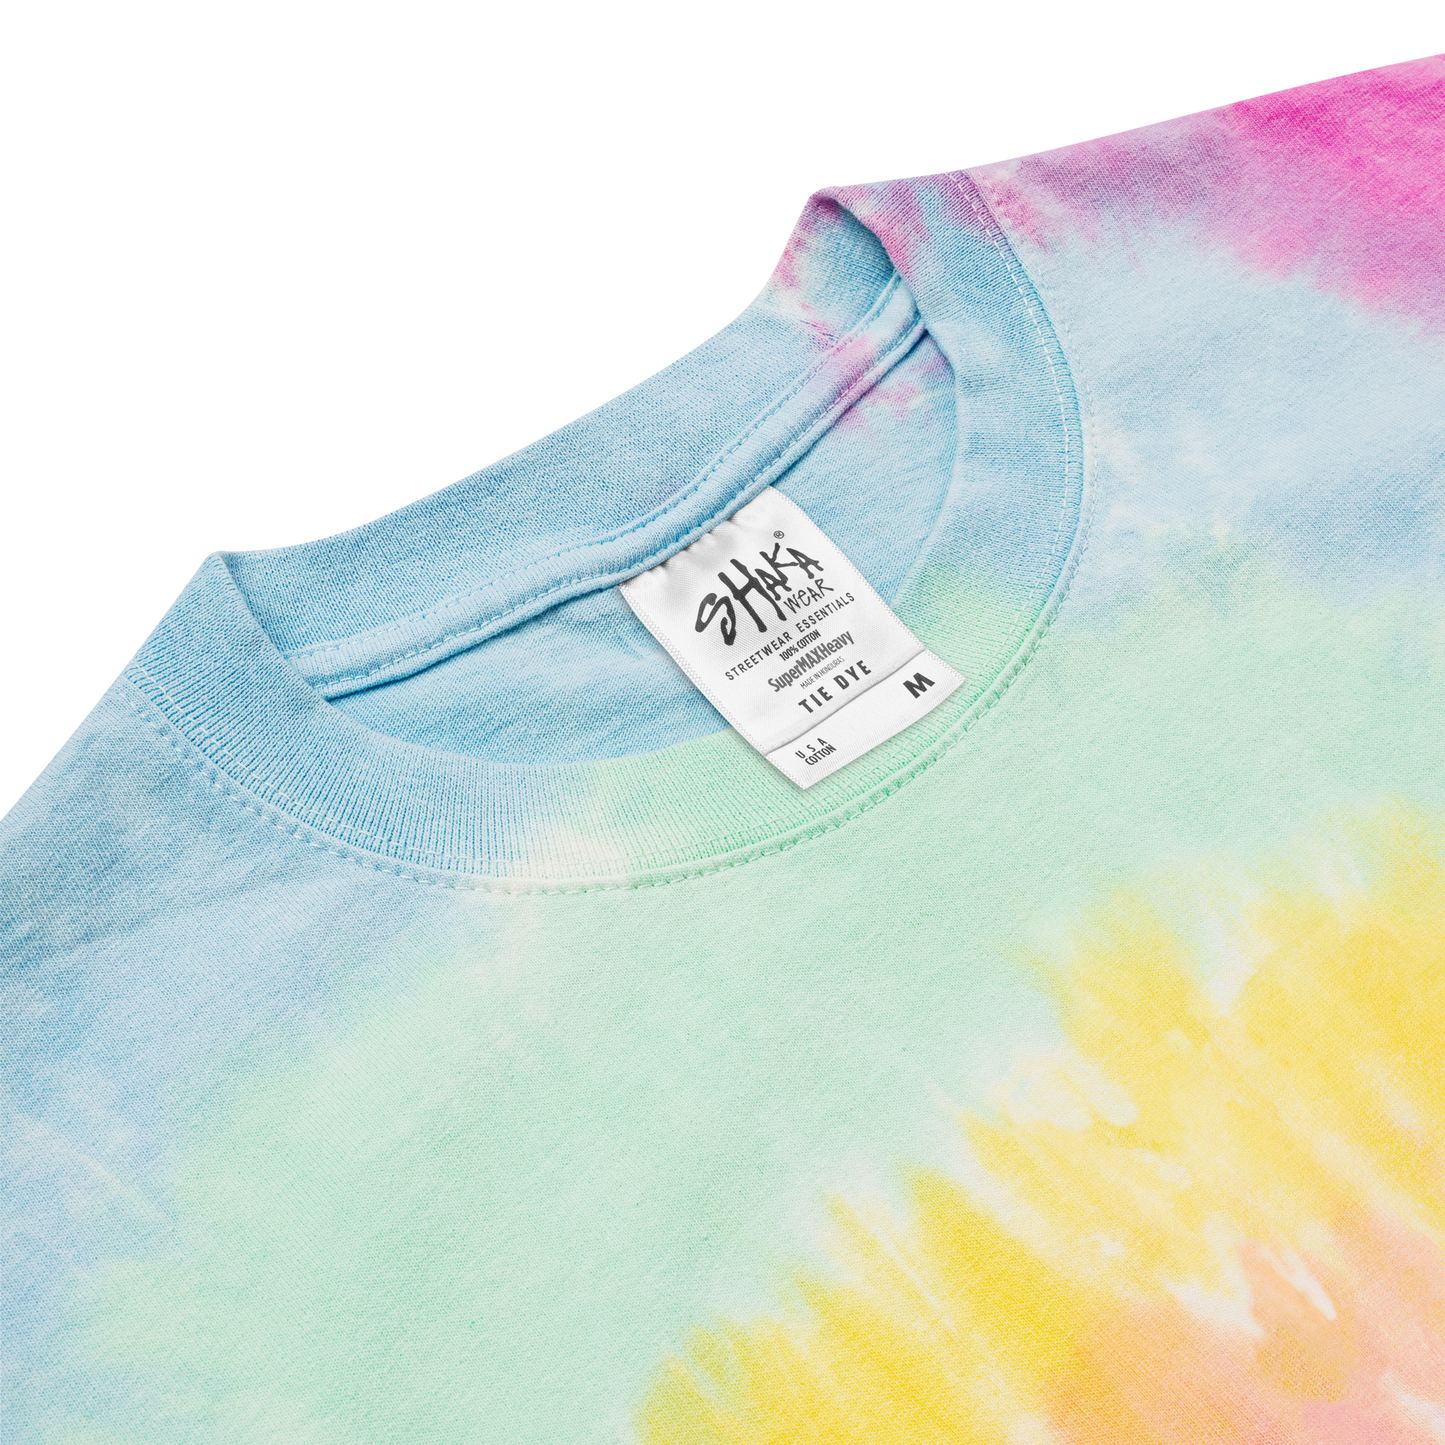 Crossed-X Oversized Tie-Dye T-Shirt • White Embroidery